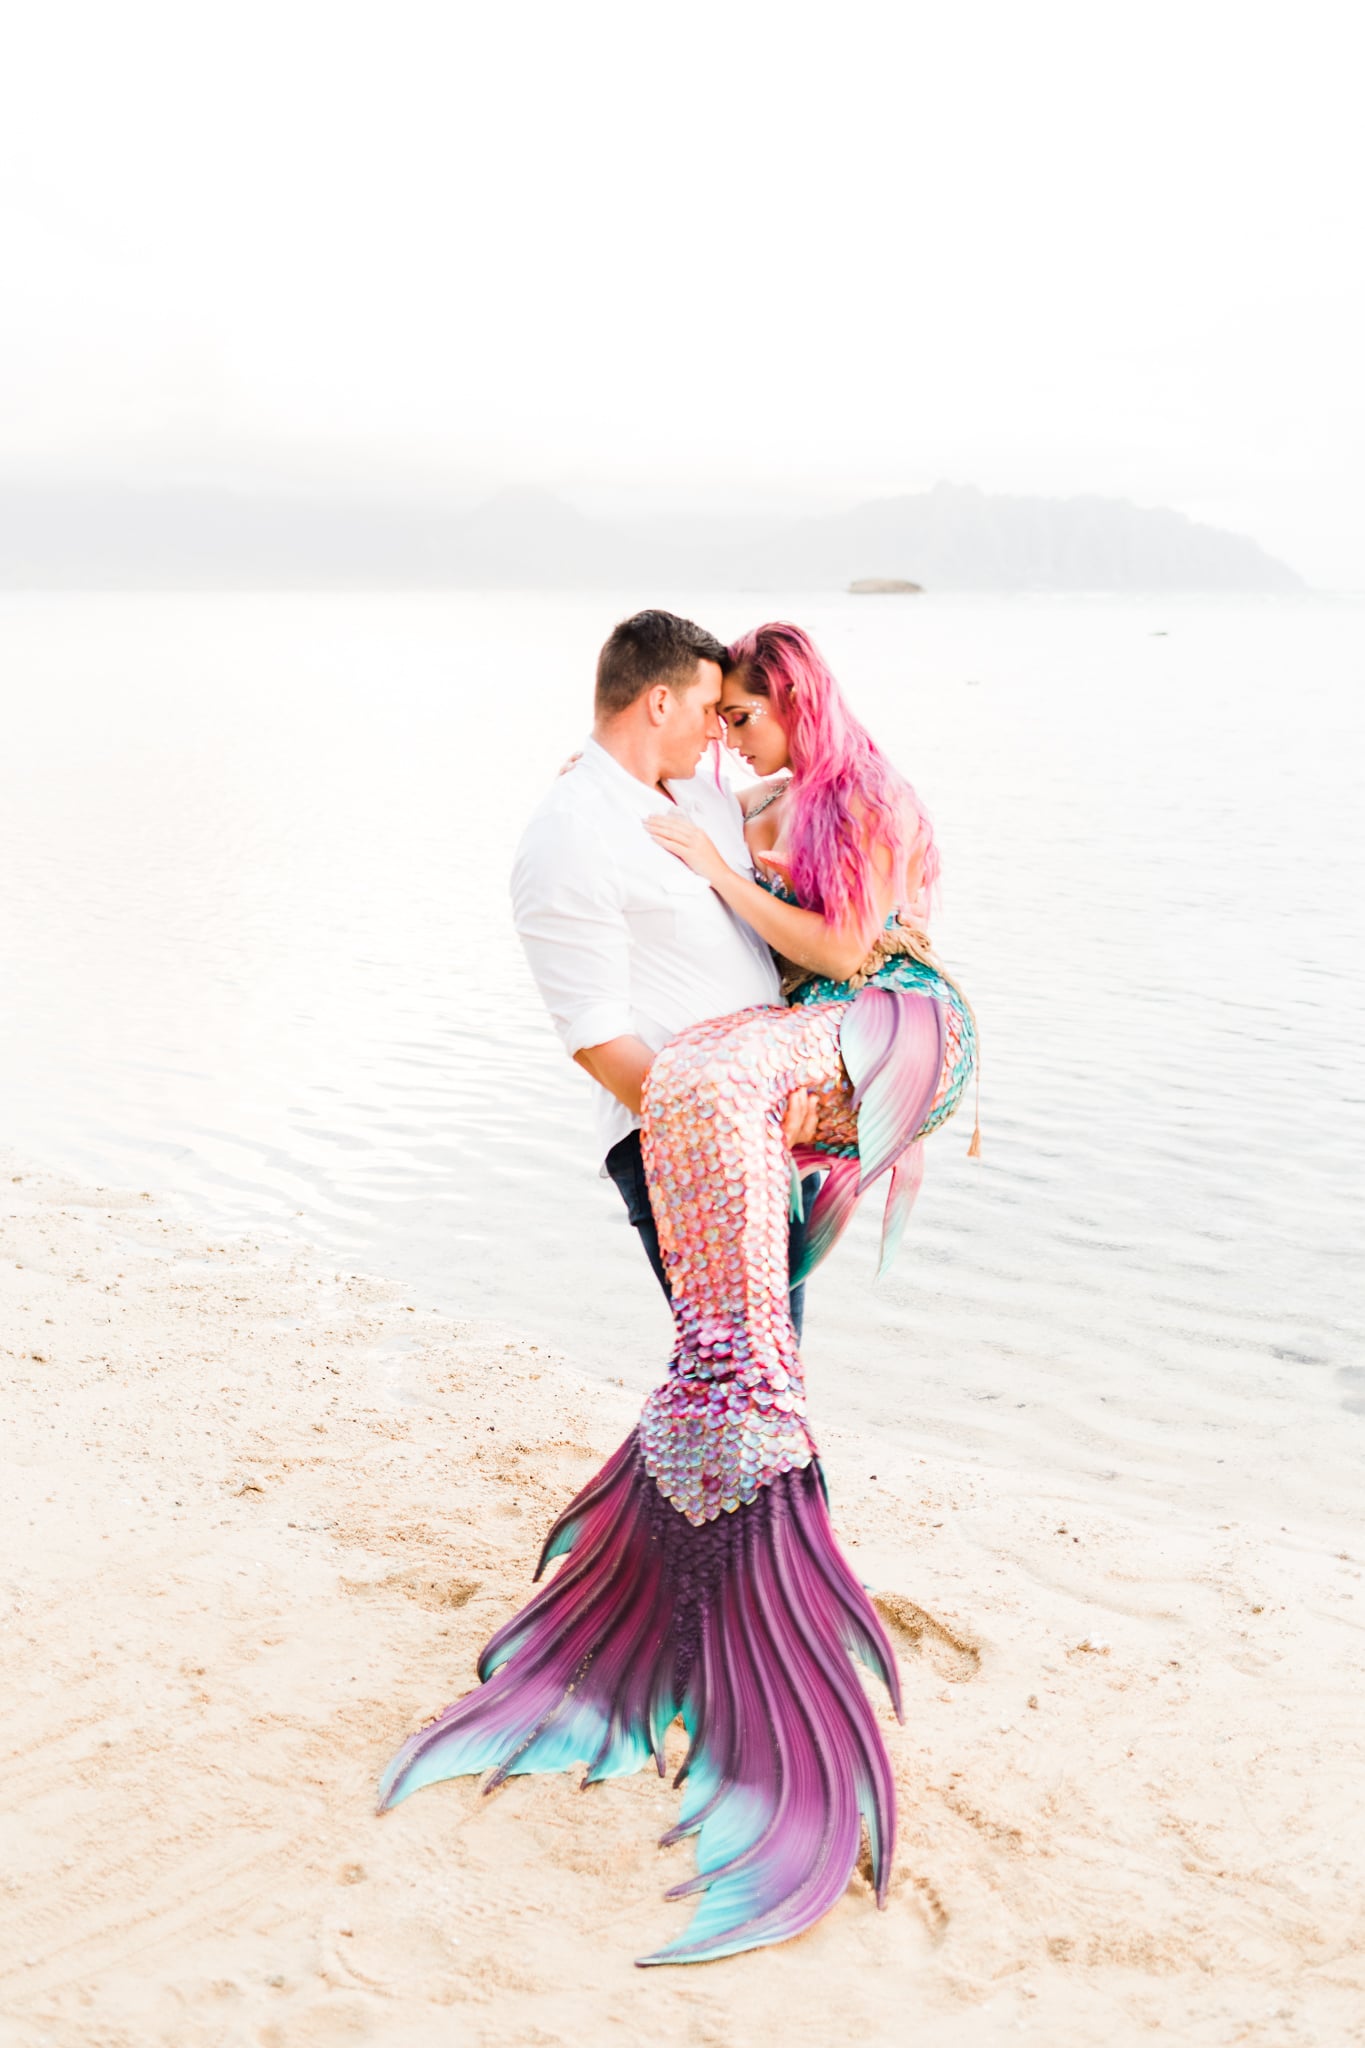 Love Sex This Couple Celebrated Their Love With An Enchanting Mermaid Shoot And It Got Steamy Popsugar Love Sex Photo 7 See more ideas about couples photoshoot, couple photography, photography. love with an enchanting mermaid shoot